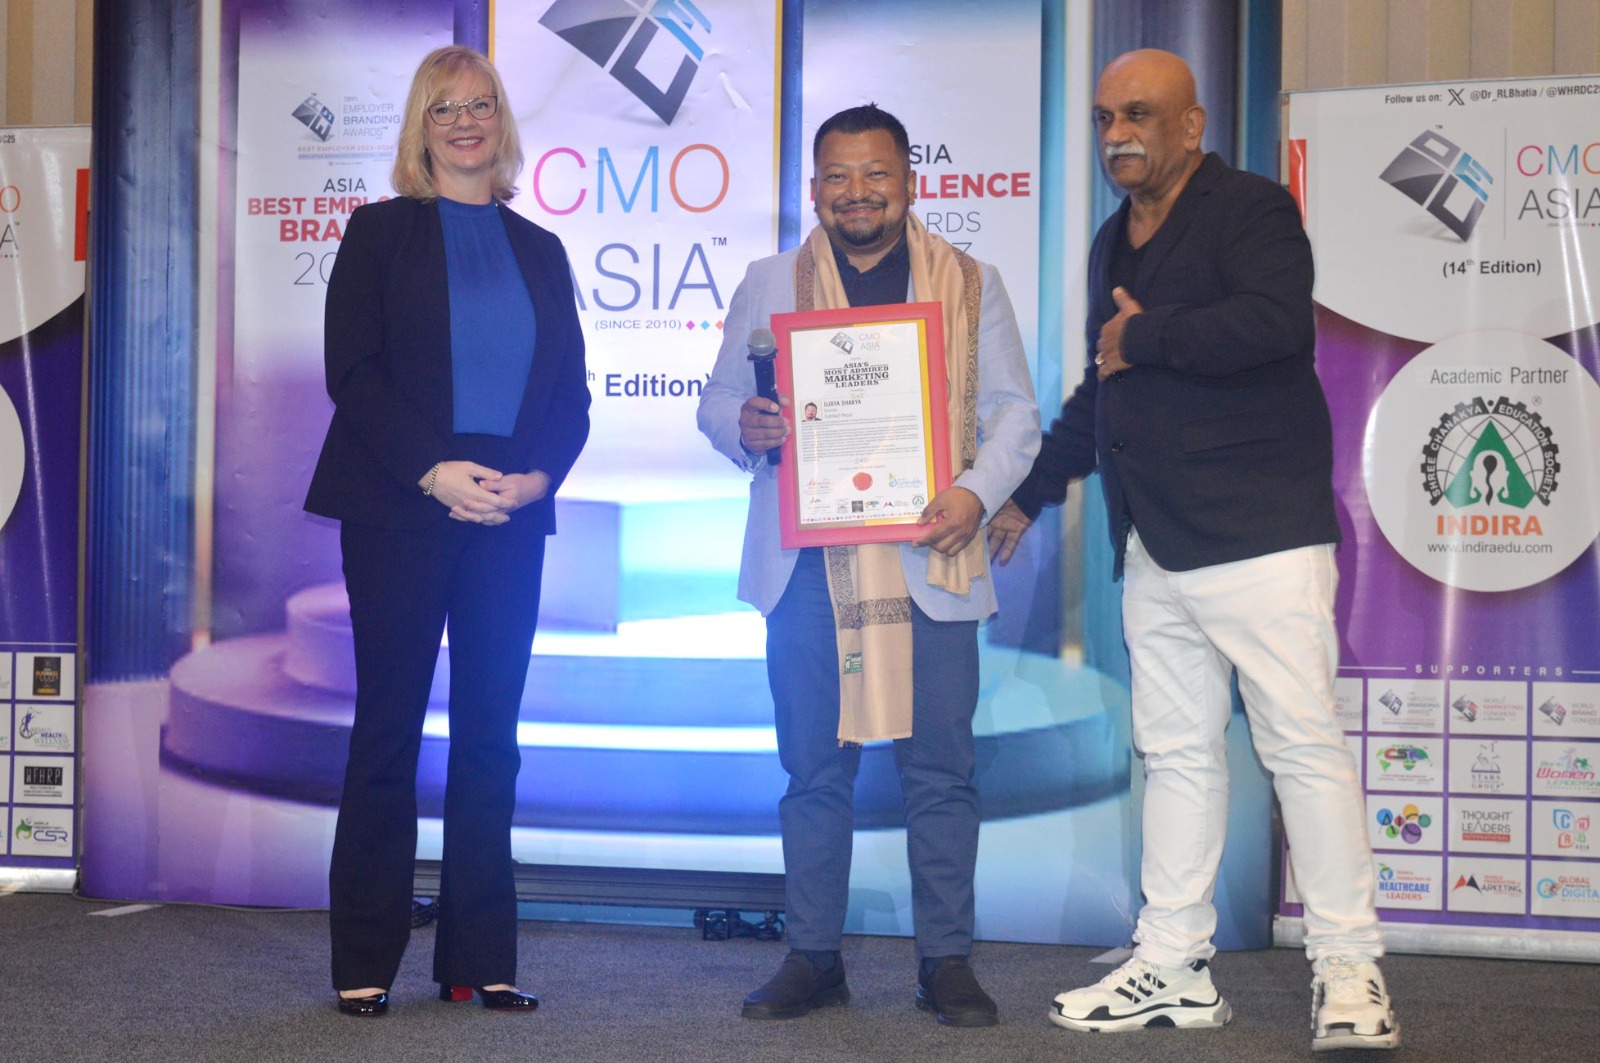 Outreach Nepal’s founder Ujaya Shakya honored as "Asia's Most Admired Marketing Leader"at CMO Asia Awards